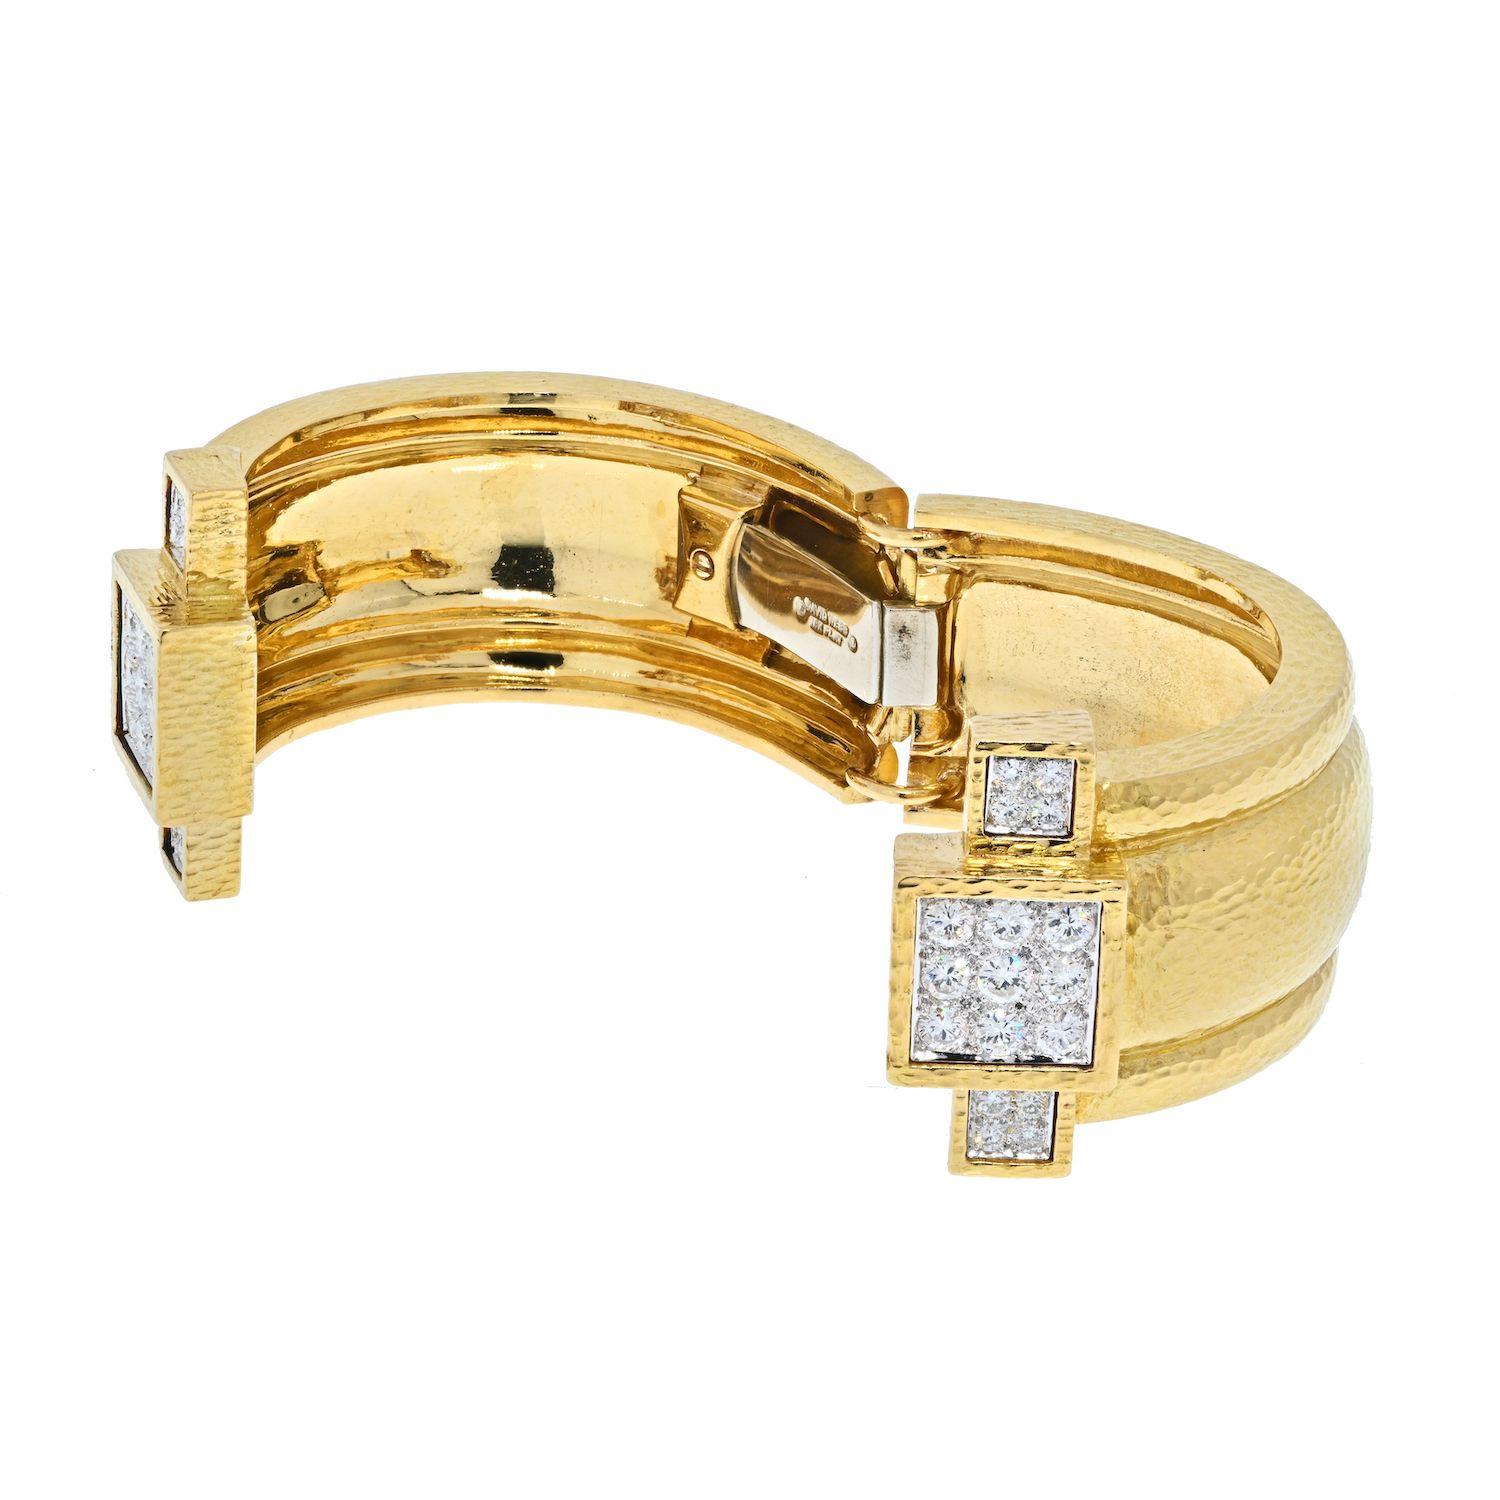 David Webb's diamond cuff bracelet, crafted in polished hammered 18k yellow gold, clamper design, with ends accented with enclosed round brilliant cut diamonds, pave set in Platinum.
Bangle width: approx. 1 inch. 
Diamond weight: approx.